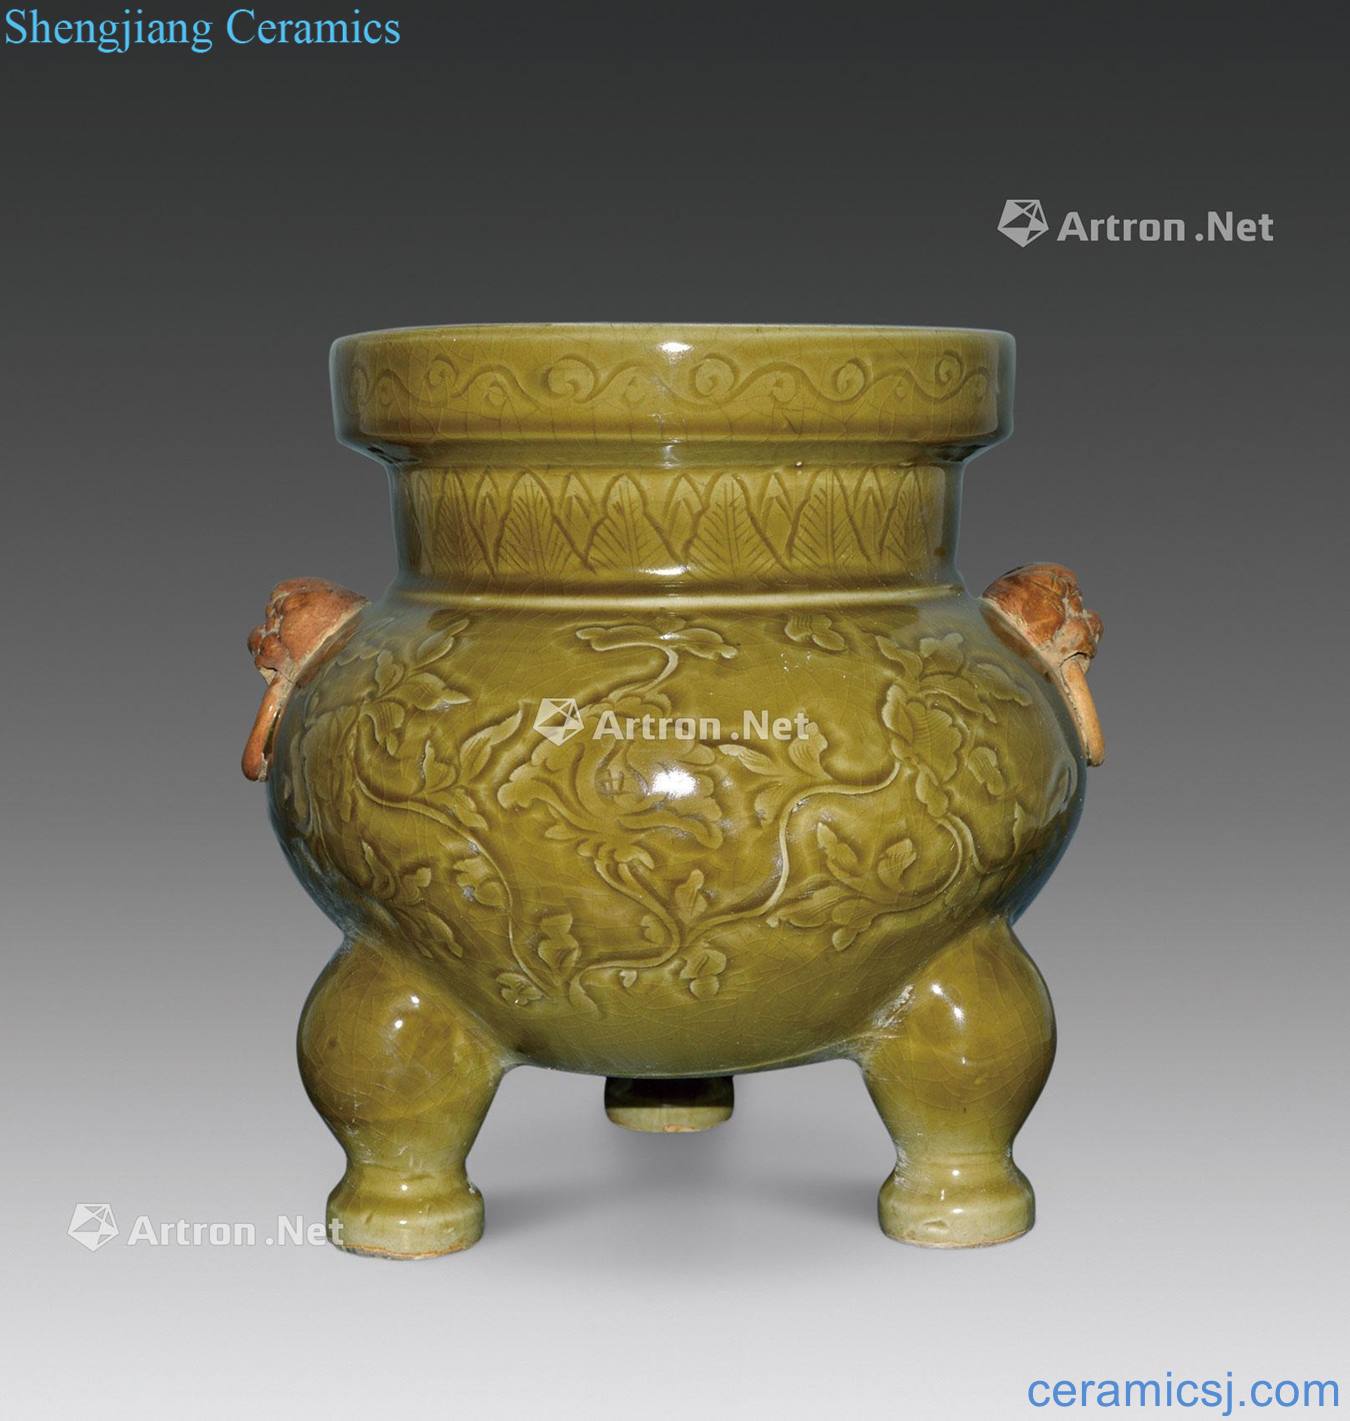 At the end of the yuan dynasty tea glaze and auxiliary beast ear furnace with three legs